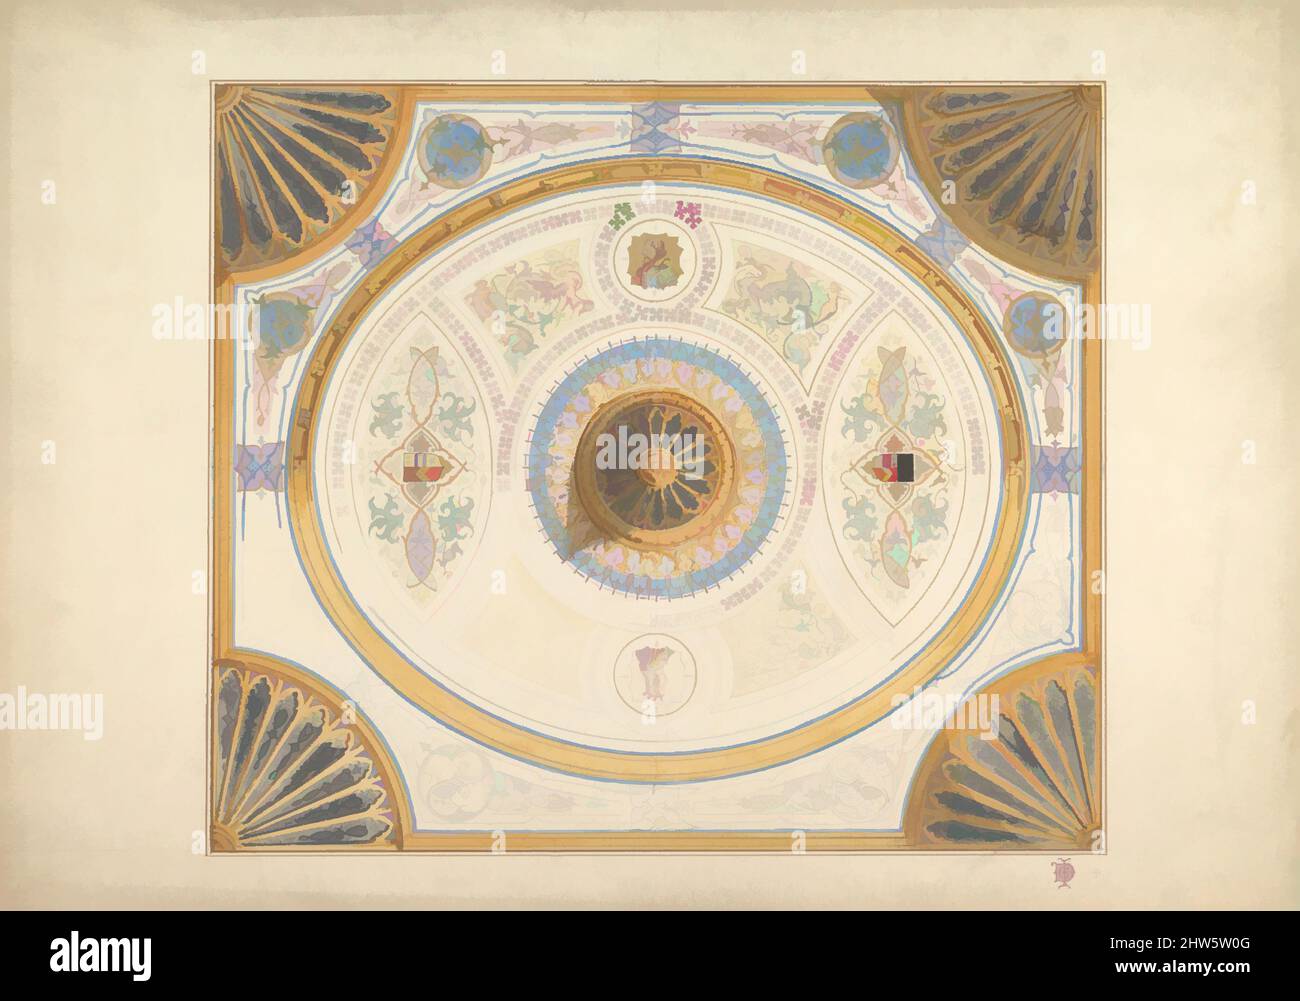 Art inspired by Design for Ceiling with Two Portraits and Fan Supports at Corners, 19th century, Graphite, watercolor and gilt, sheet: 19 1/8 x 12 1/2 in. (48.6 x 31.8 cm), John Gregory Crace (British, London 1809–1889 Dulwich), and Son, Classic works modernized by Artotop with a splash of modernity. Shapes, color and value, eye-catching visual impact on art. Emotions through freedom of artworks in a contemporary way. A timeless message pursuing a wildly creative new direction. Artists turning to the digital medium and creating the Artotop NFT Stock Photo